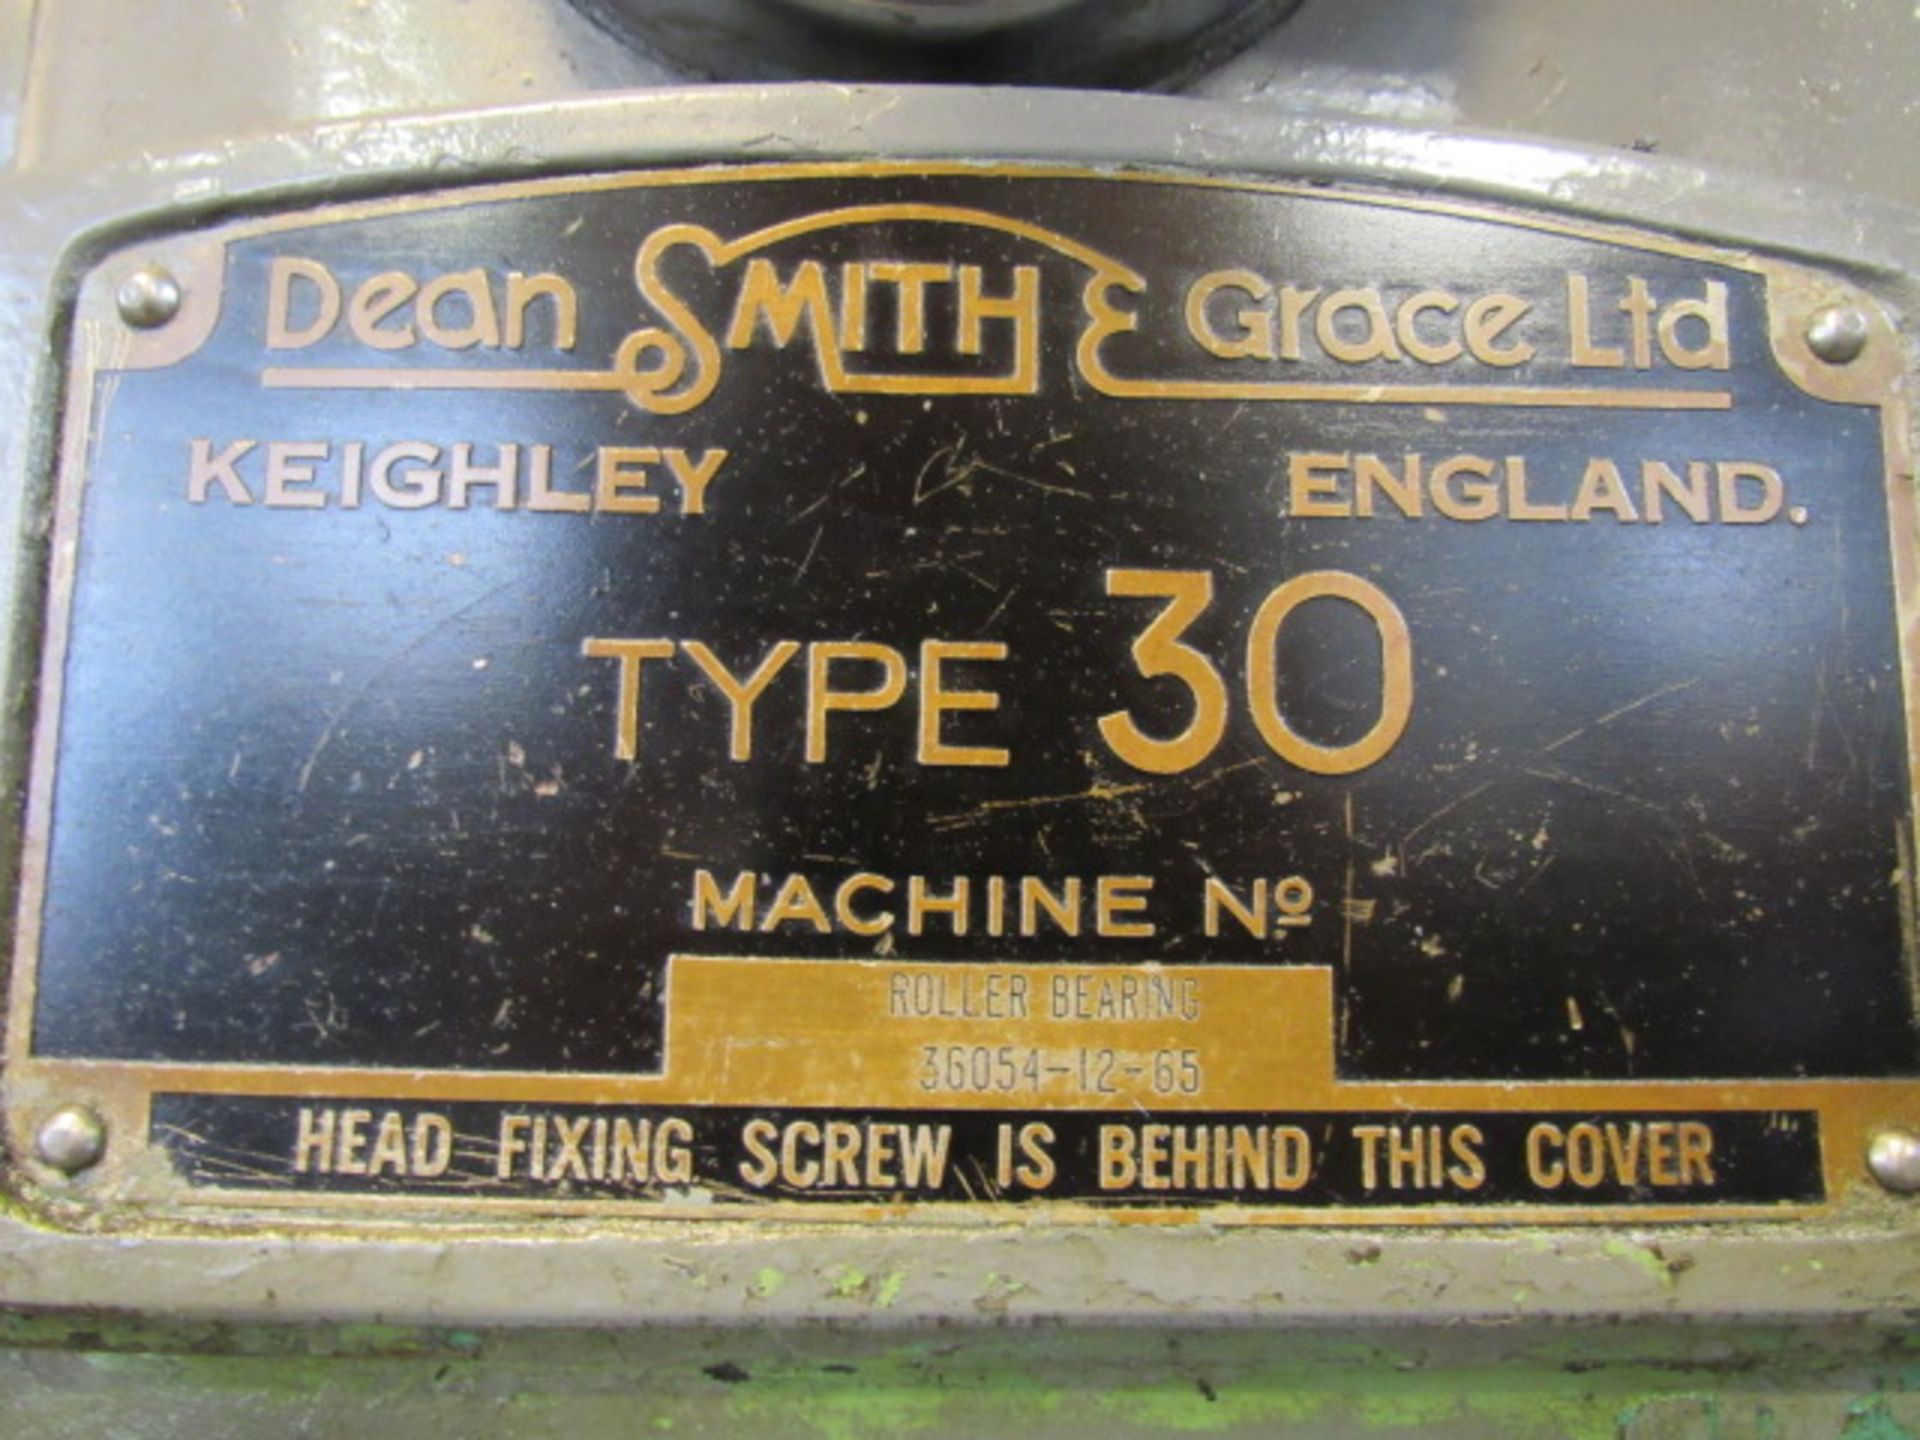 Dean Smith & Grace #30 30'' x 96'' Gap Bed Engine Lathe - Image 11 of 11